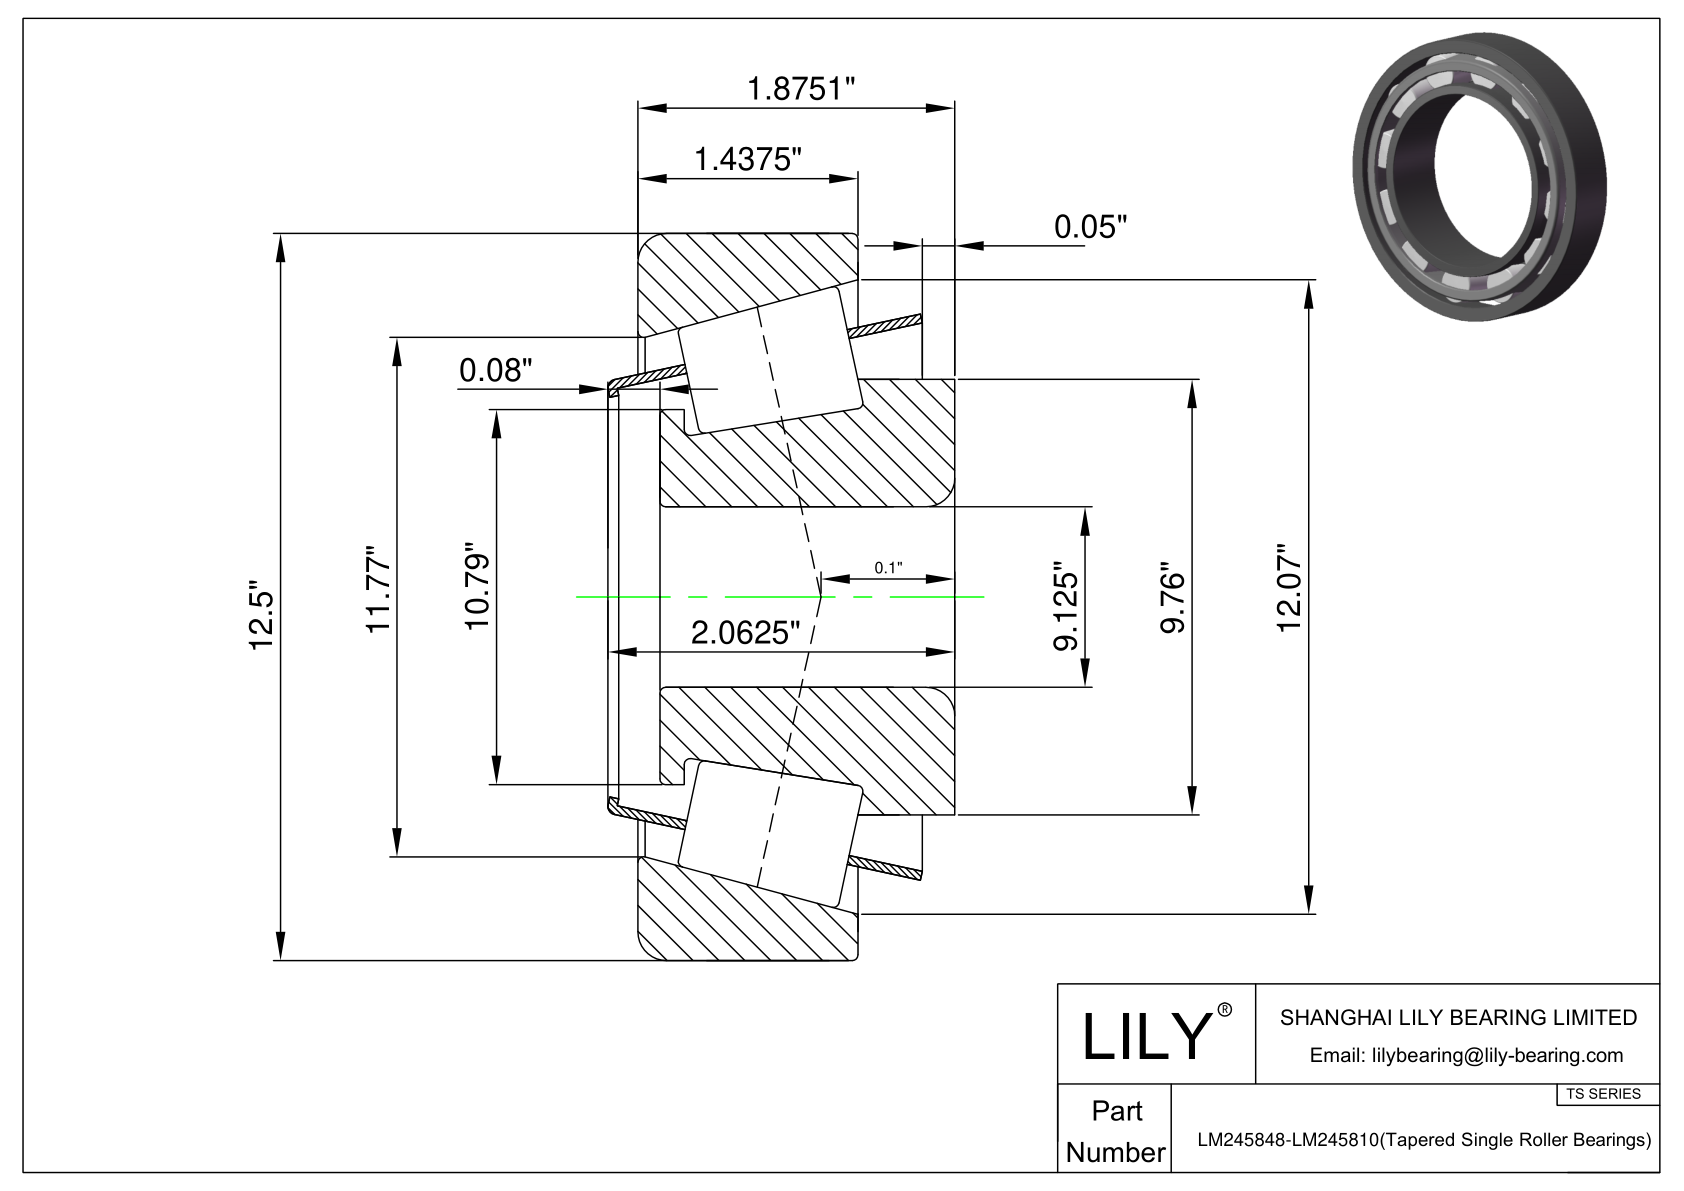 LM245848-LM245810 TS (Tapered Single Roller Bearings) (Imperial) cad drawing